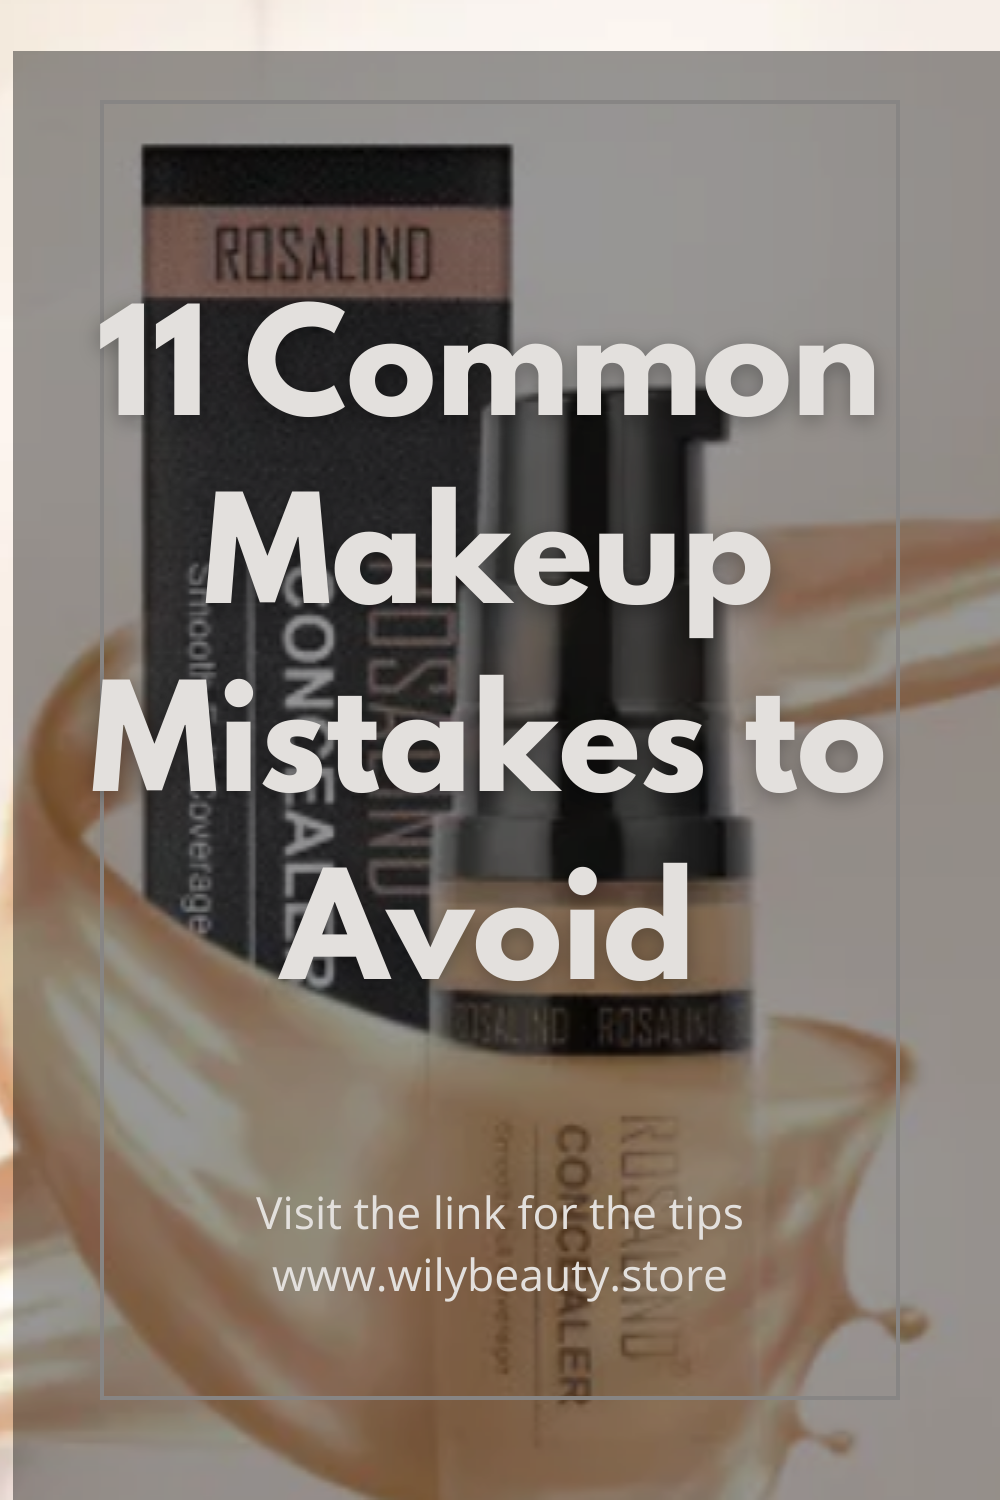 11 Common Makeup Mistakes to Avoid